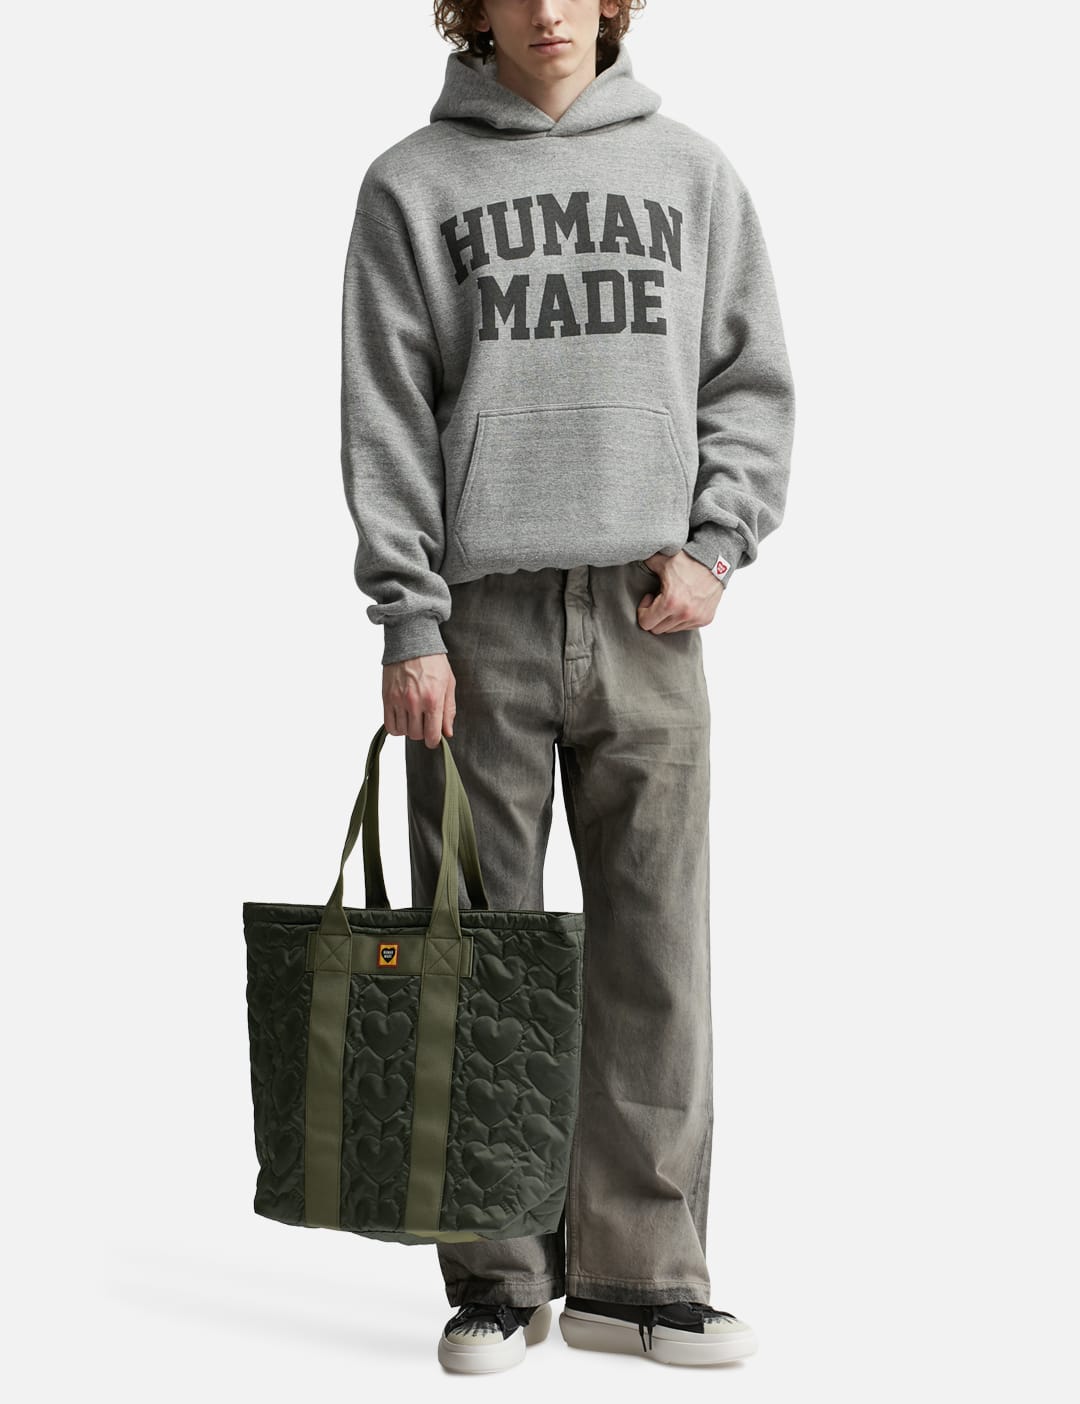 Human Made - Heart Quilting Tote Bag | HBX - Globally Curated